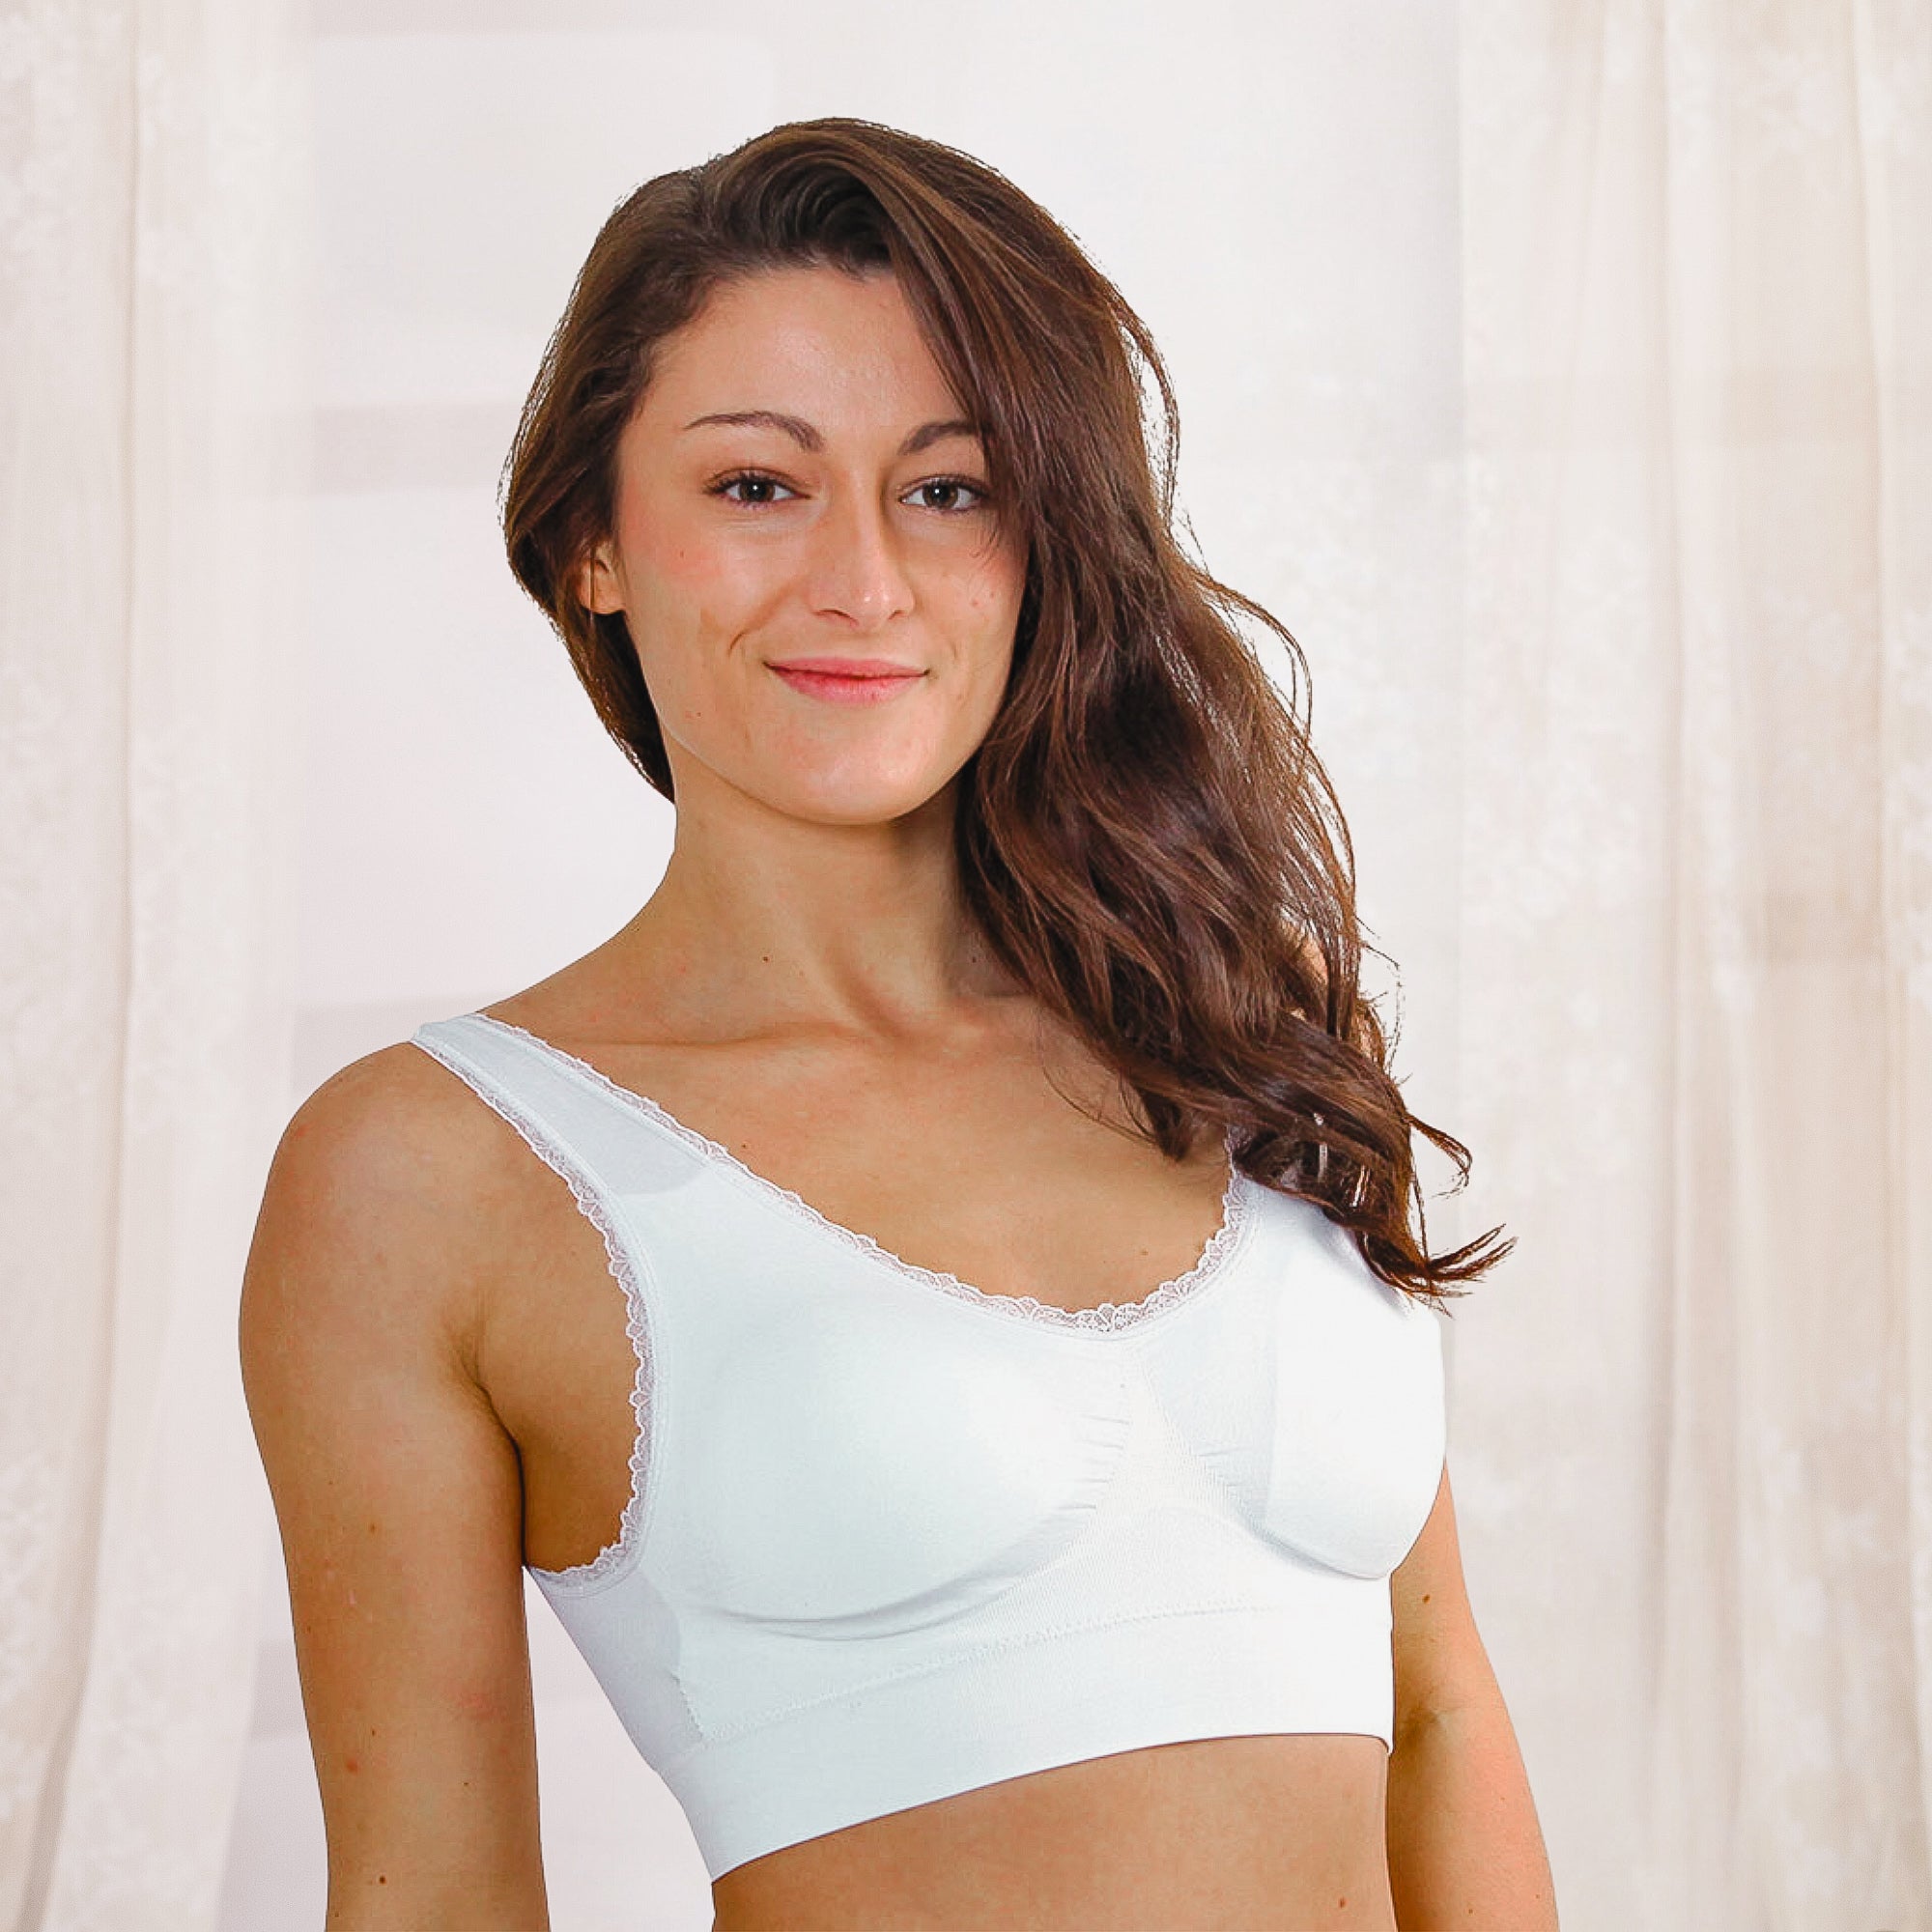 Onlineshop - GENIE BRA / SET OF 3 UNITS (WHITE, BLACK AND BEIGE) SIZE  AVAILABLE For your orders WhatsApp 76485299 or via the following link  wa.me/96176485299